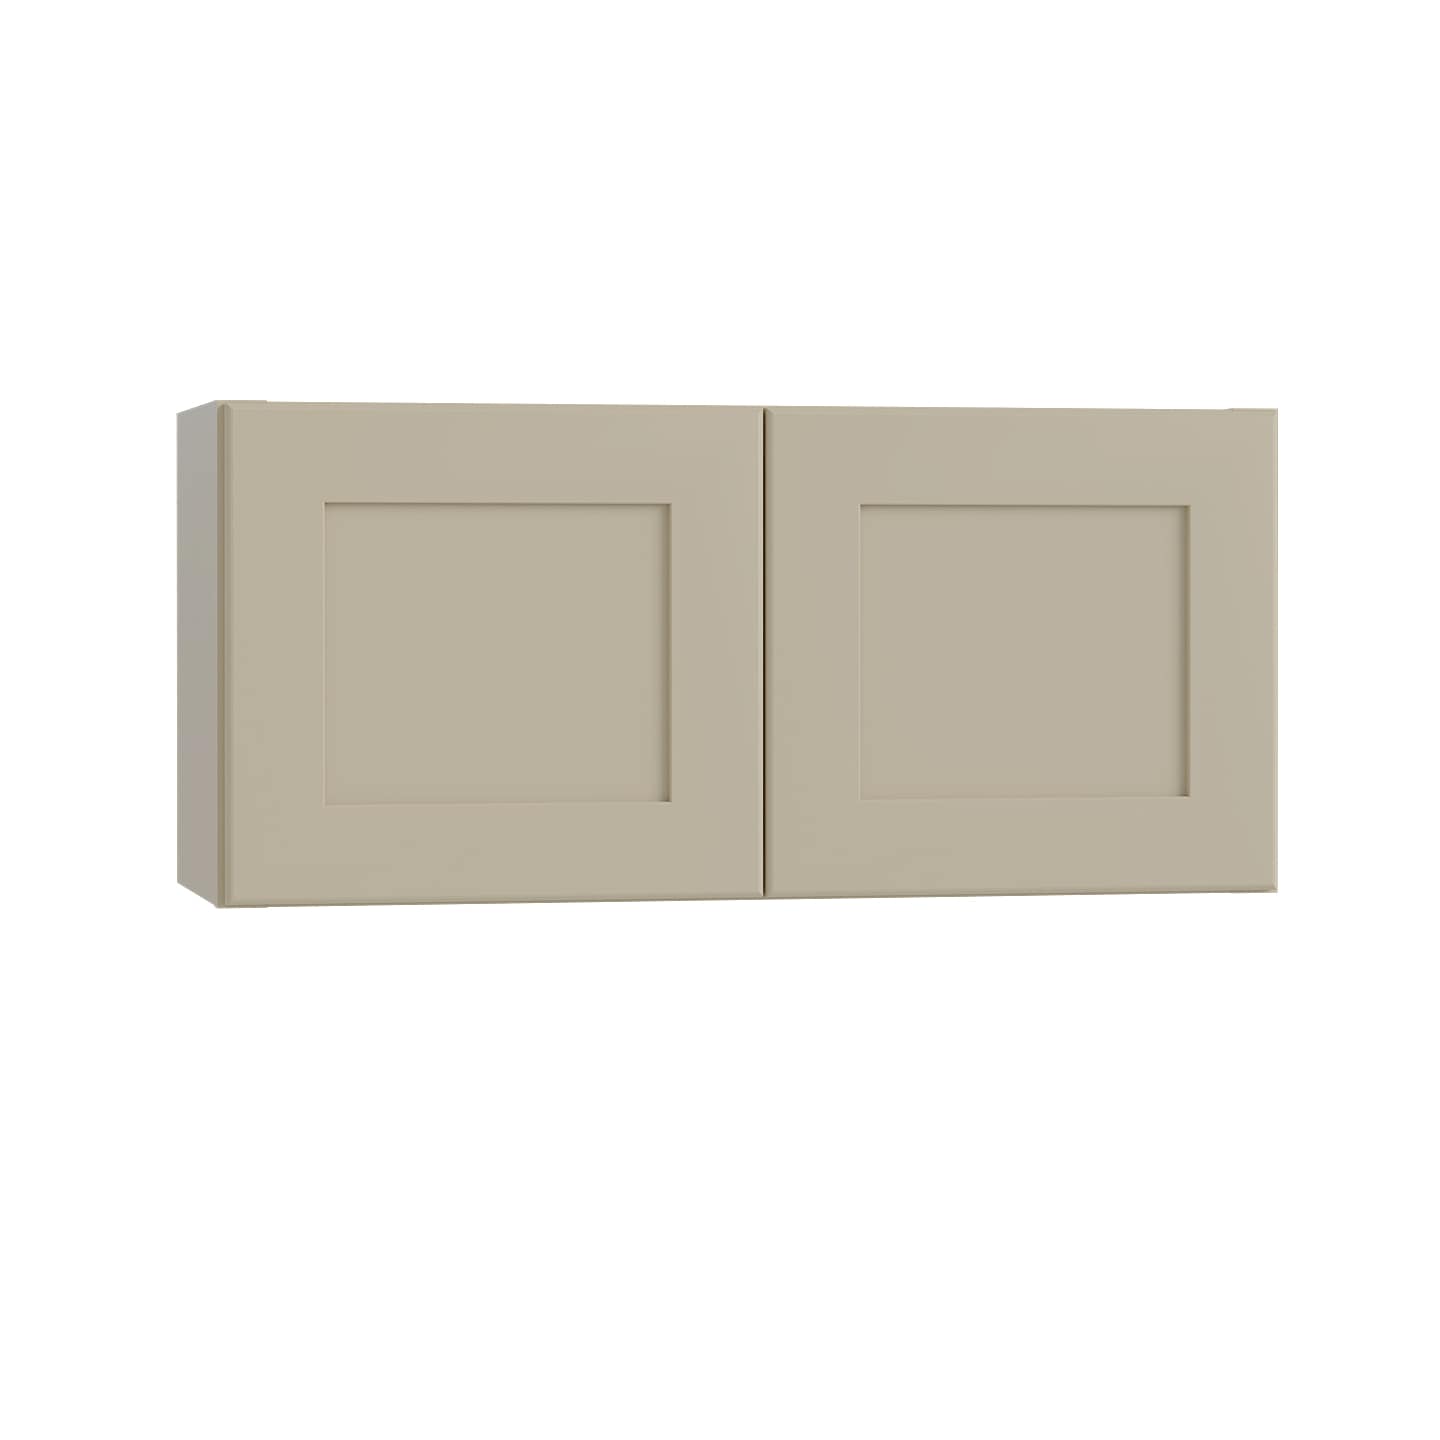 Luxxe Cabinetry 36-in W x 18-in H x 12-in D Norfolk Blended Cream Painted Door Wall Fully Assembled Semi-custom Cabinet in Off-White | W3618-NBC